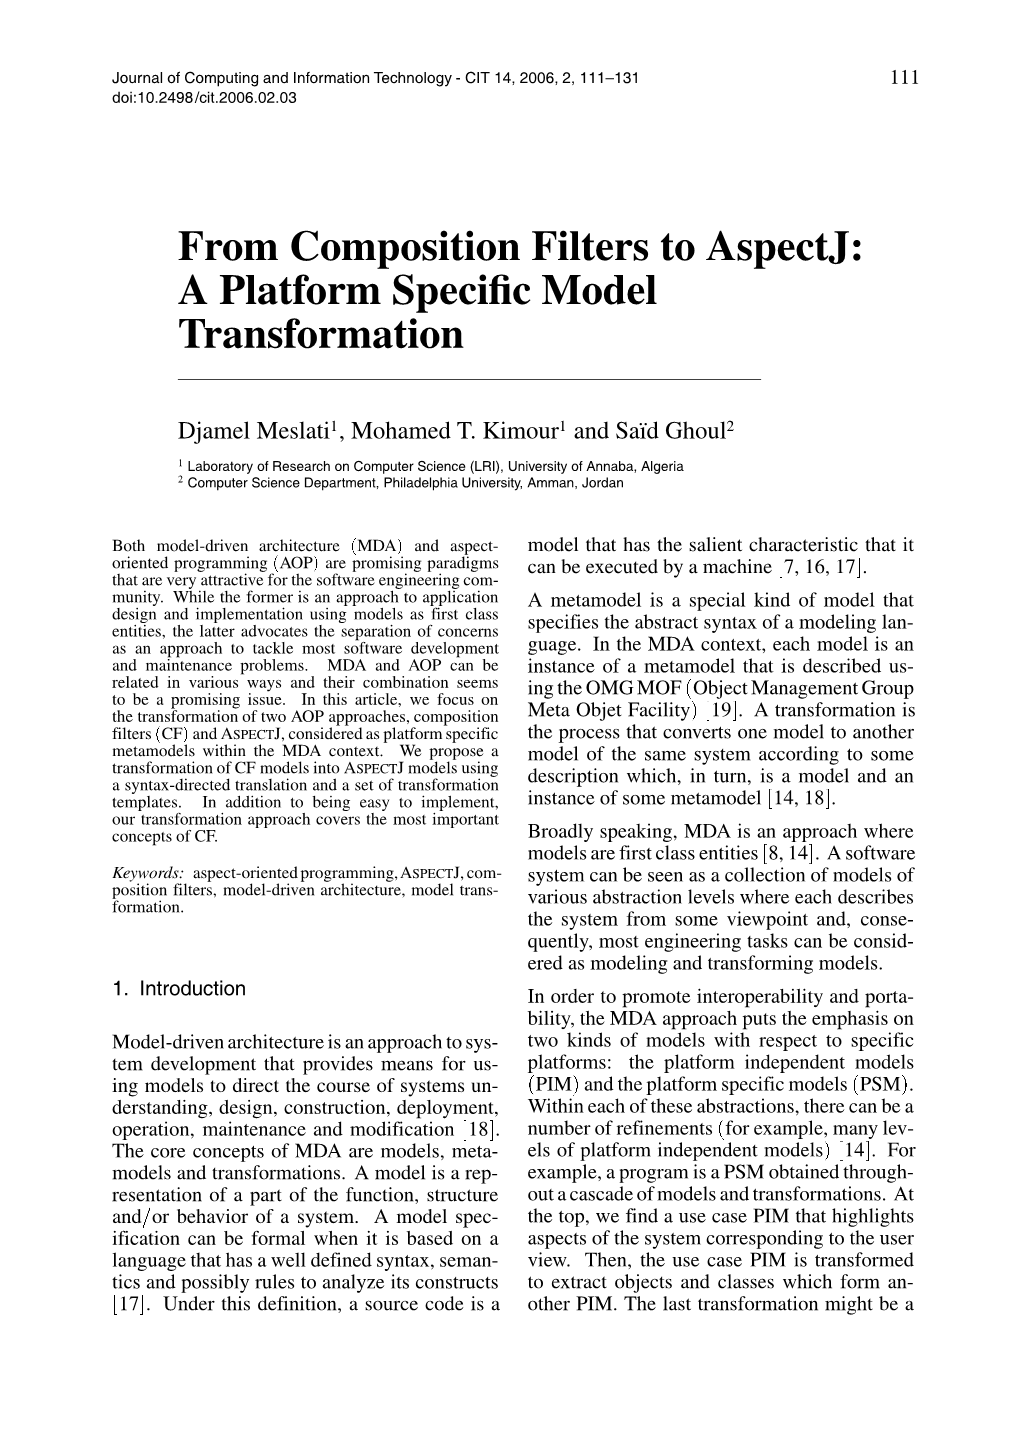 From Composition Filters to Aspectj: a Platform Speciﬁcmodel Transformation